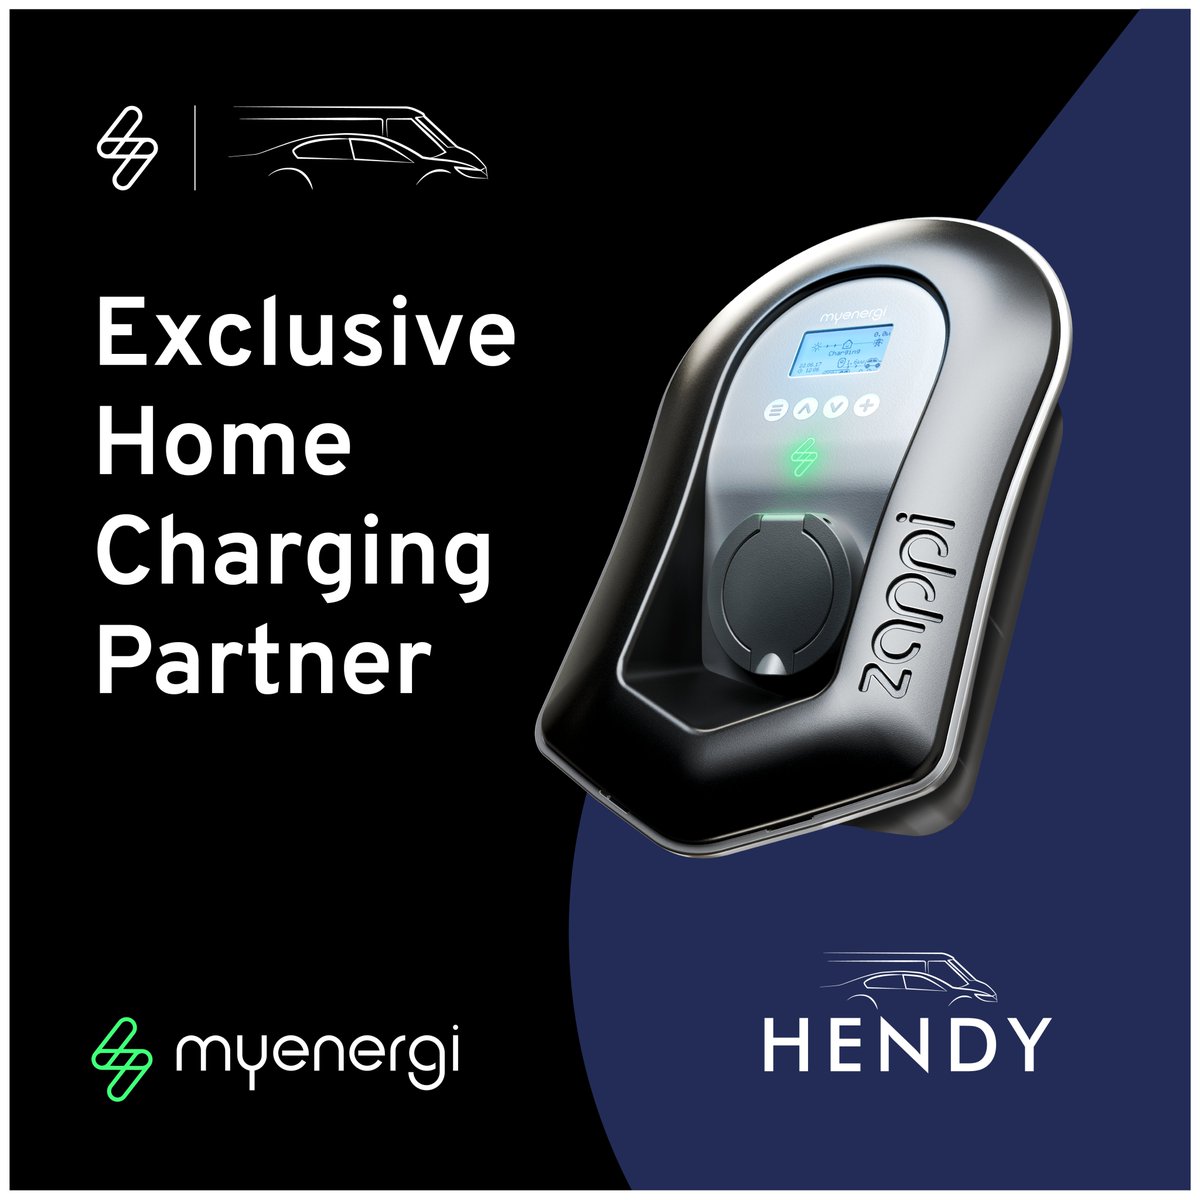 myenergi is now the exclusive home charging partner of @HendyGroup! 🚗⚡ From electric dreams to green machines, we're here to power up your journey towards a greener future! 💚 #myenergixHendy 🌱 Read more: tinyurl.com/3hjsntpy